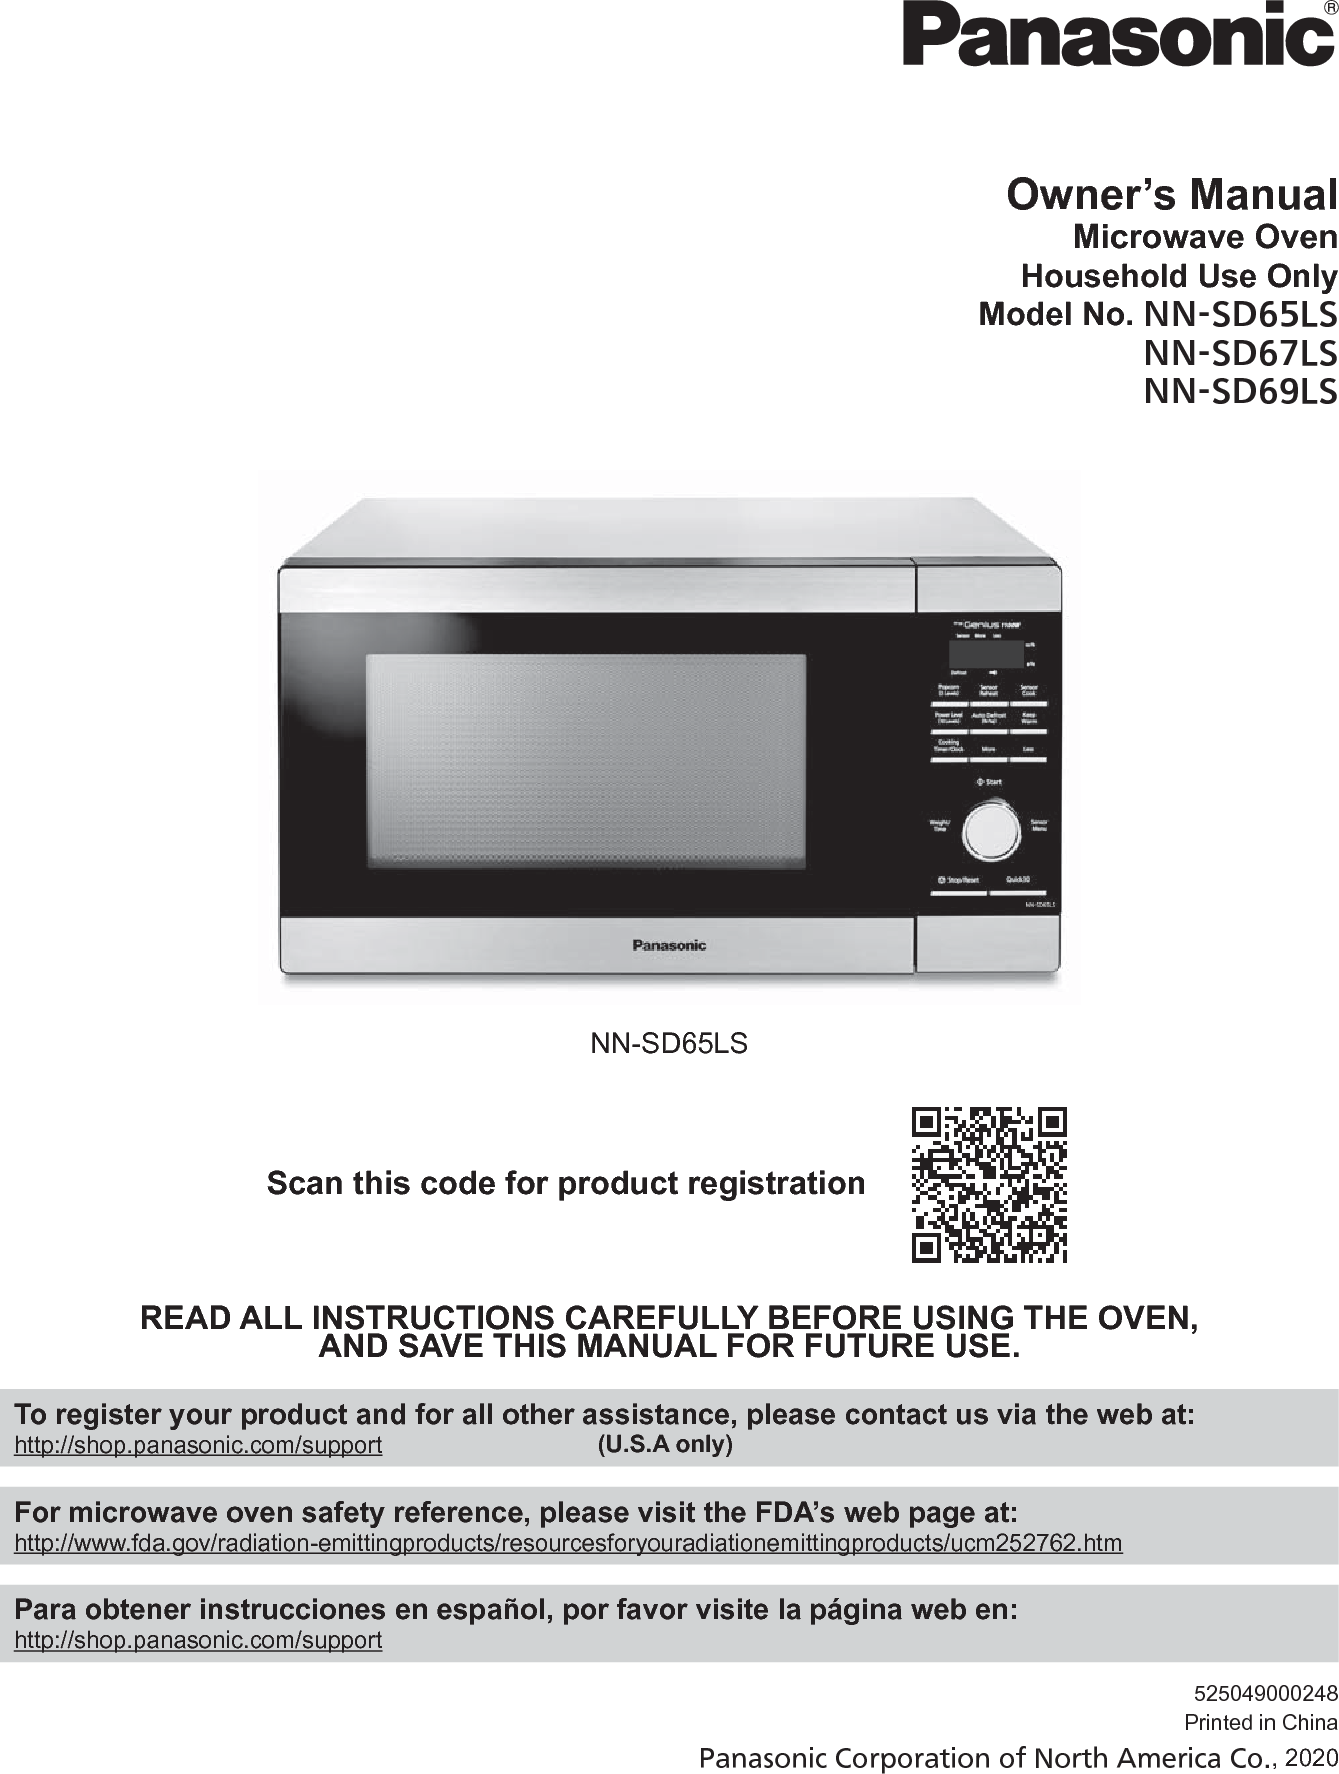 Galanz 11034005 Microwave Oven User Manual NN SD65LS 67LS 68LS EN indd